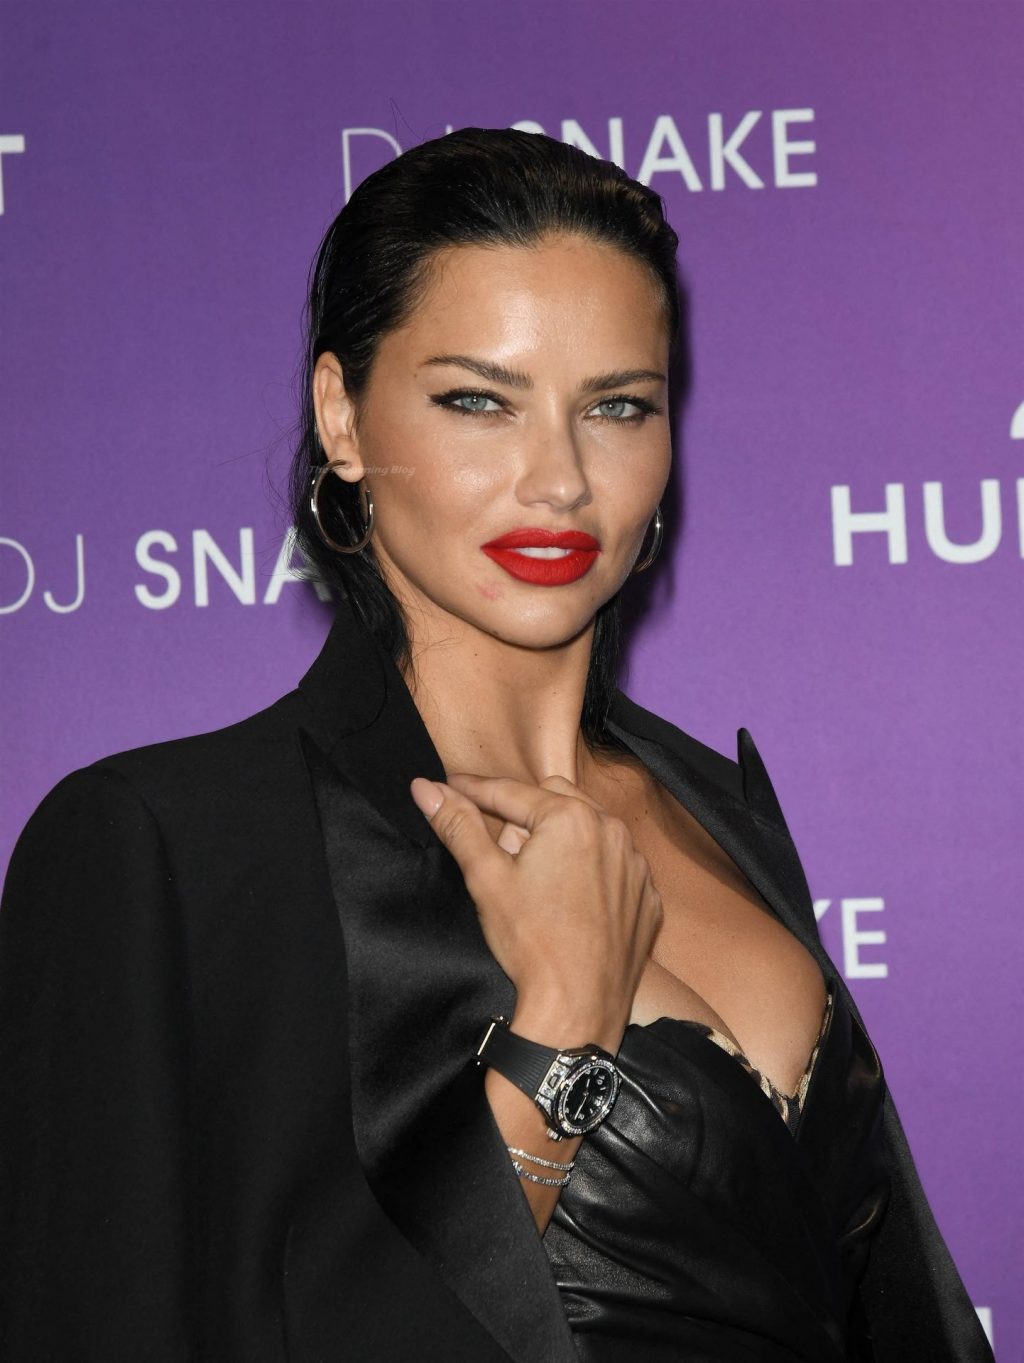 Adriana Lima Flaunts Her Cleavage at the Launch Party for the Hublot x DJ Snake Watch (31 Photos) [Updated 09/04/21]